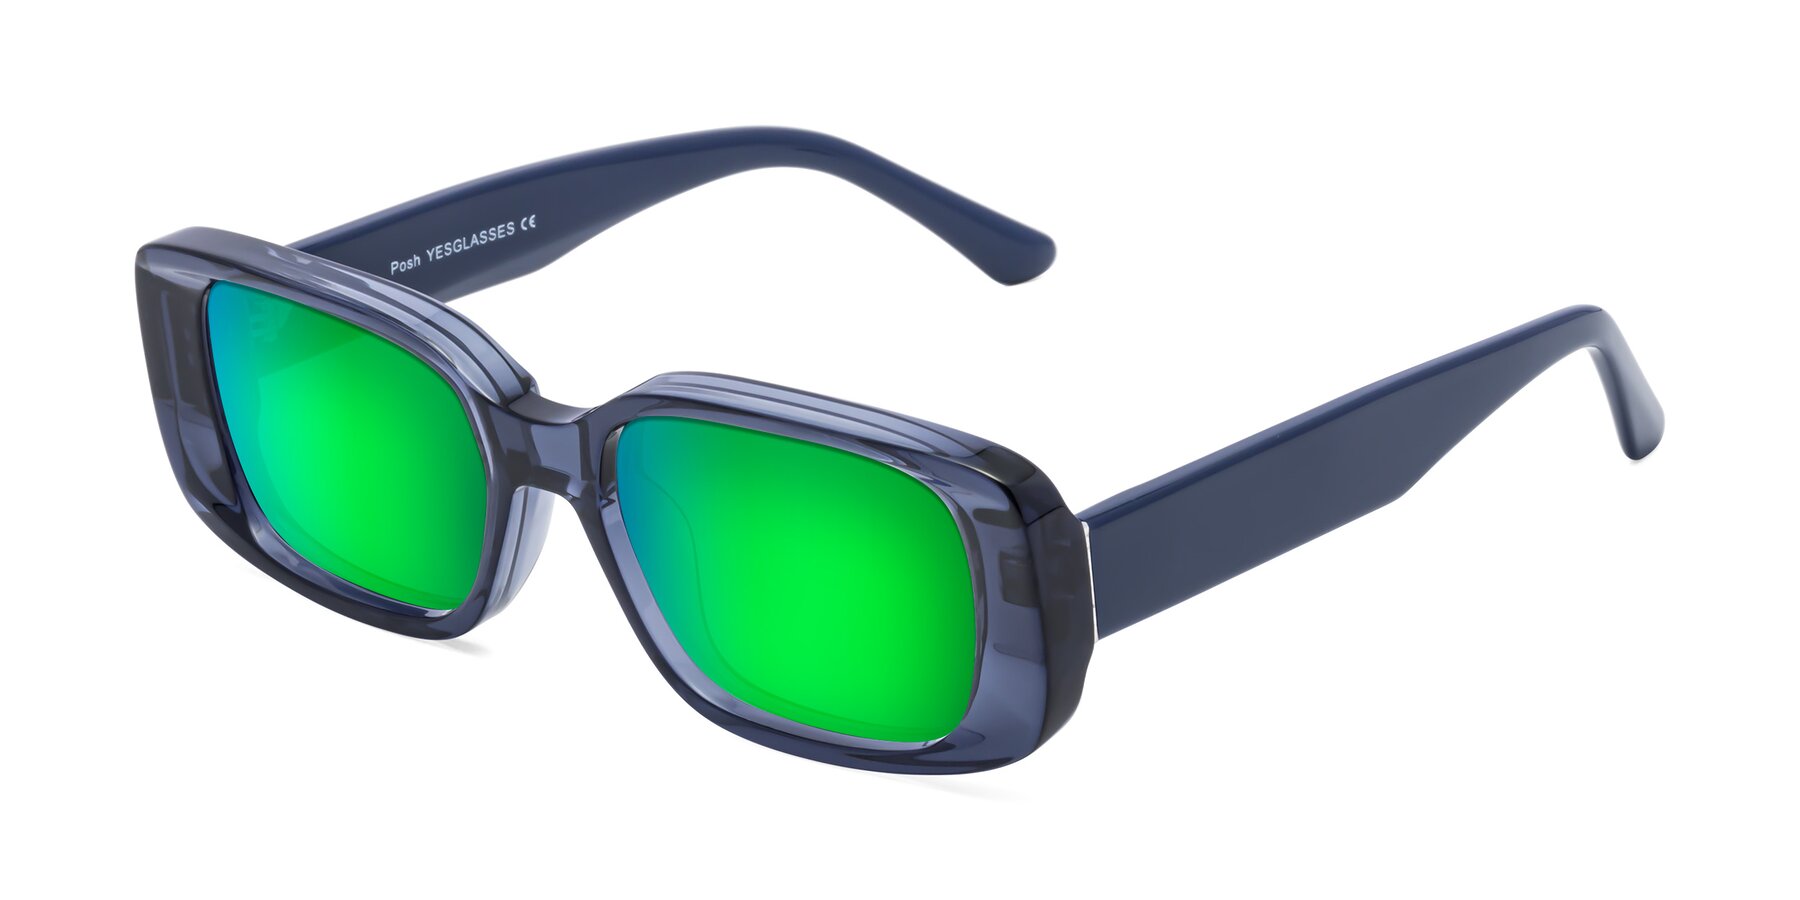 Angle of Posh in Translucent Blue with Green Mirrored Lenses